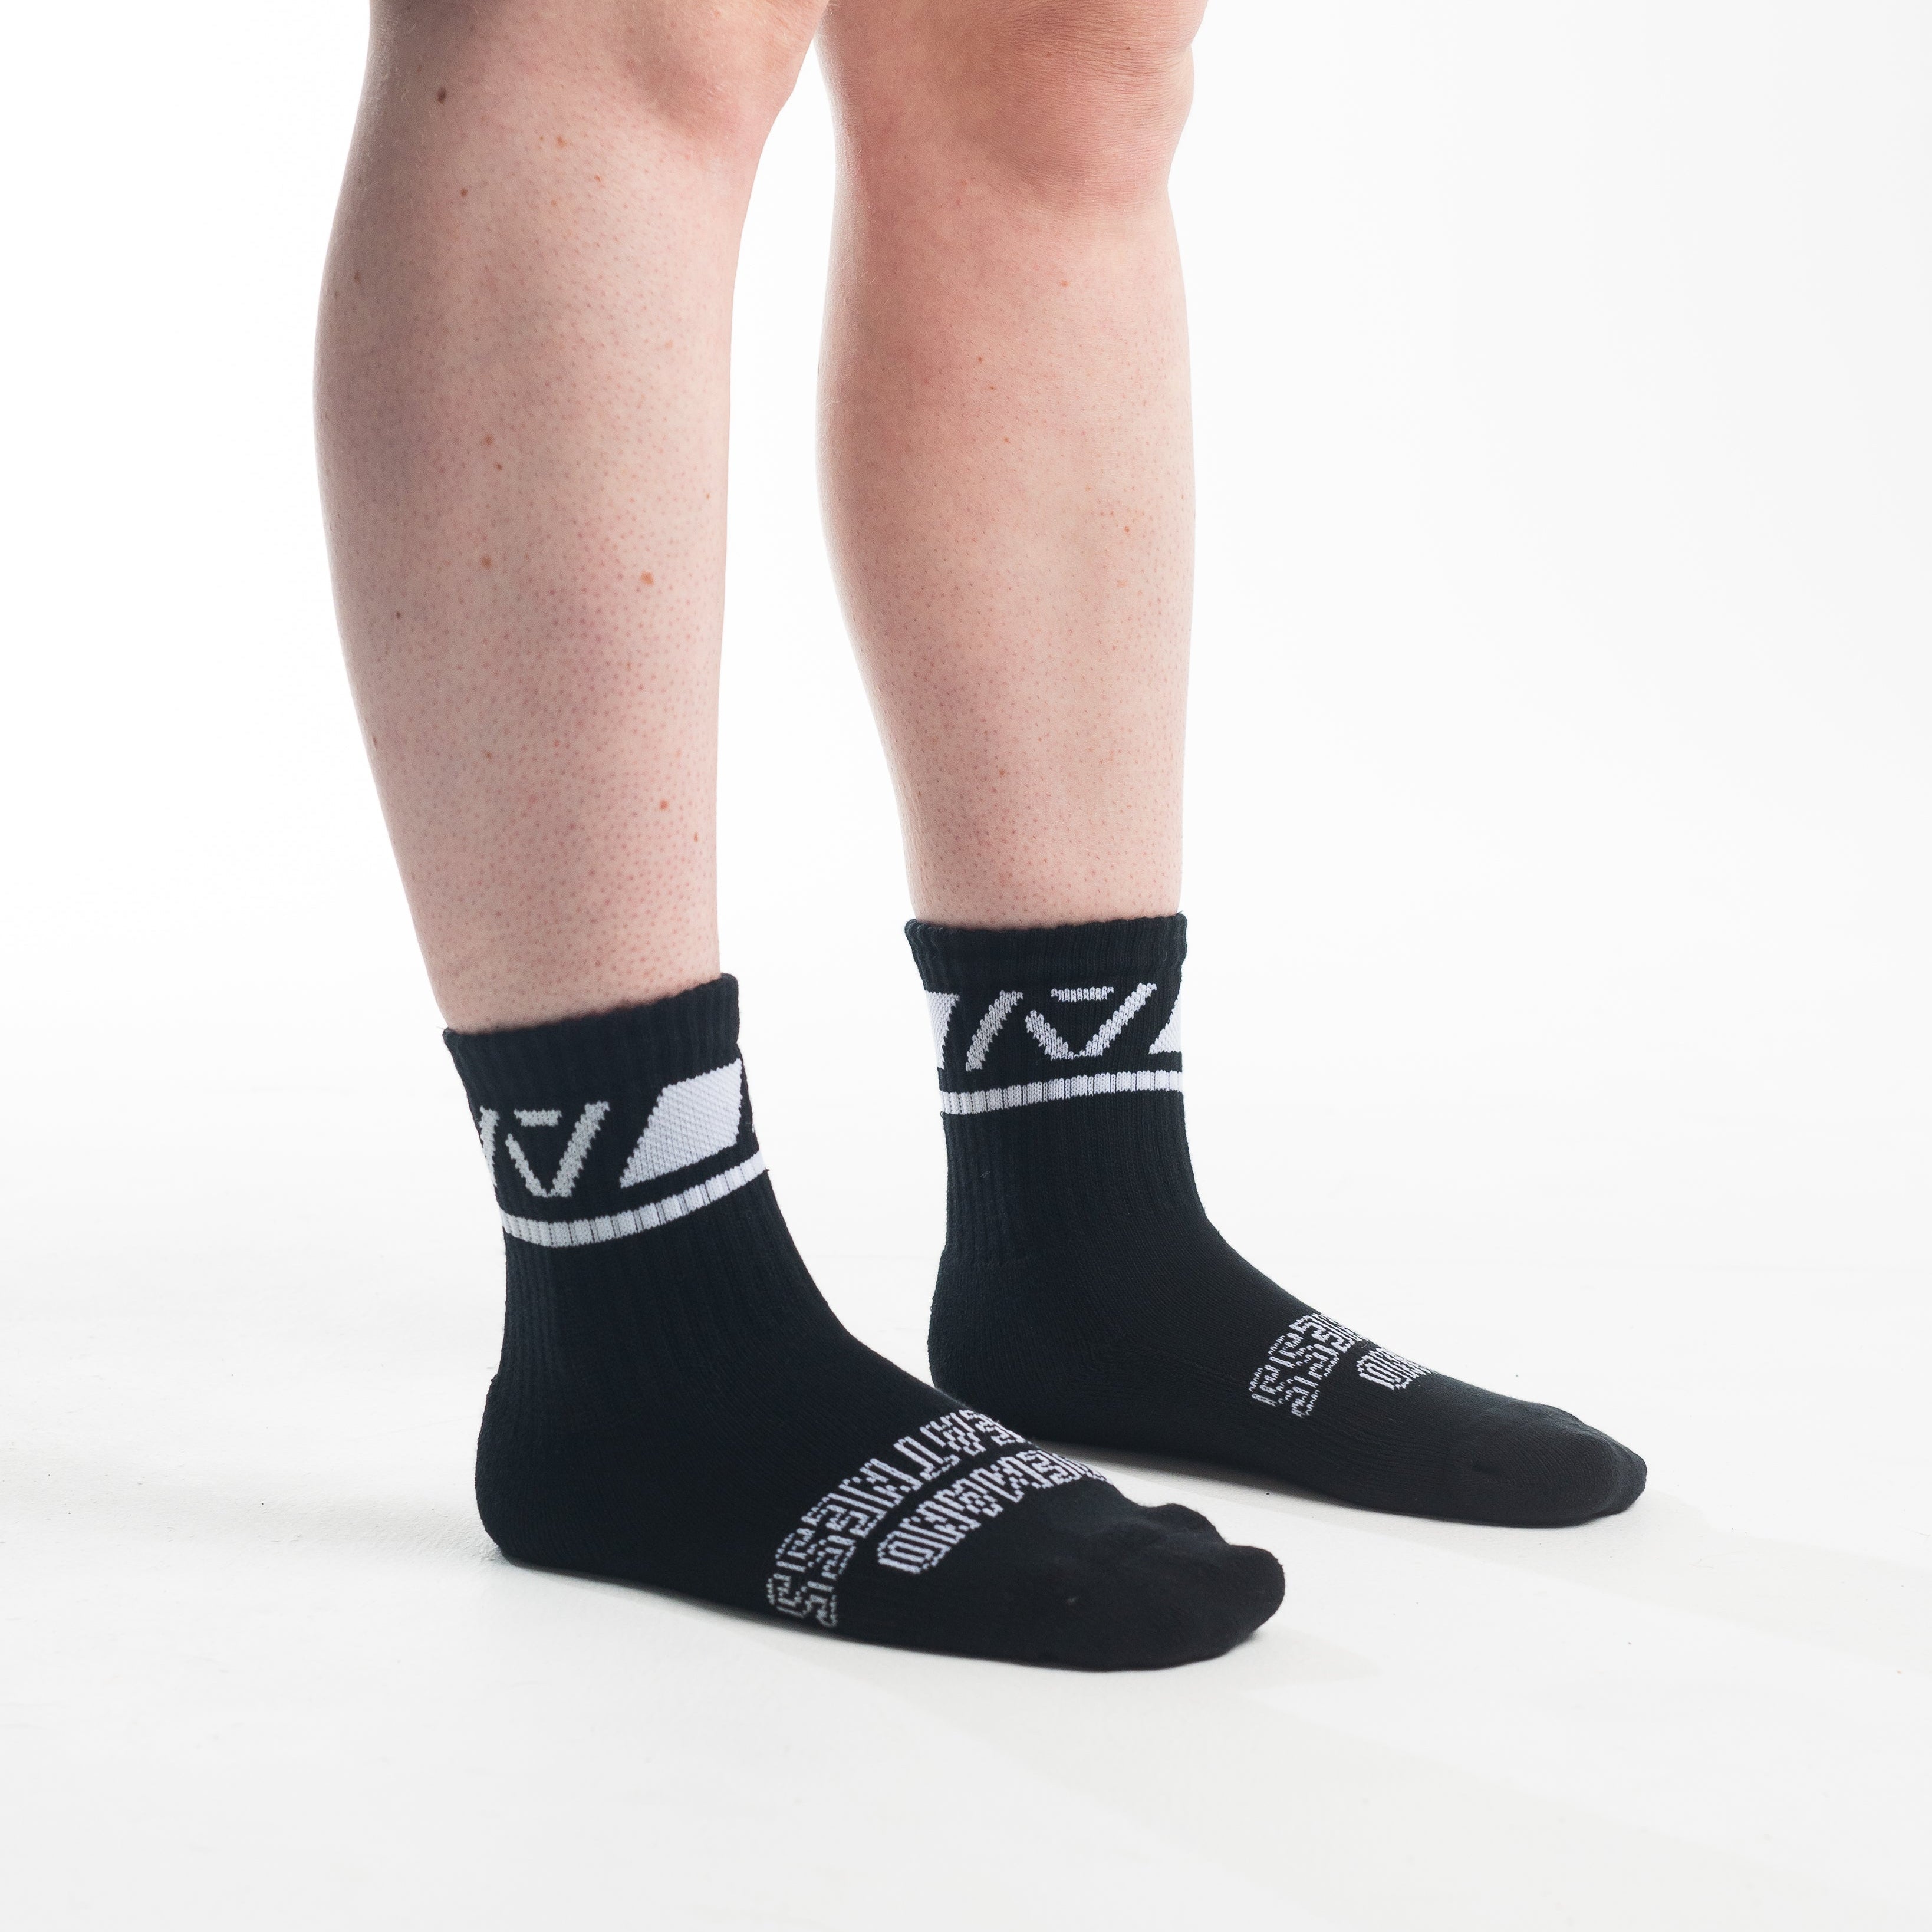 A7 Domino Crew socks showcase gold logos and let your energy show on the platform, in your training or while out and about. The IPF Approved Stealth Meet Kit includes Powerlifting Singlet, A7 Meet Shirt, A7 Zebra Wrist Wraps, A7 Deadlift Socks, Hourglass Knee Sleeves (Stiff Knee Sleeves and Rigor Mortis Knee Sleeves). Genouillères powerlifting shipping to France, Spain, Ireland, Germany, Italy, Sweden and EU.